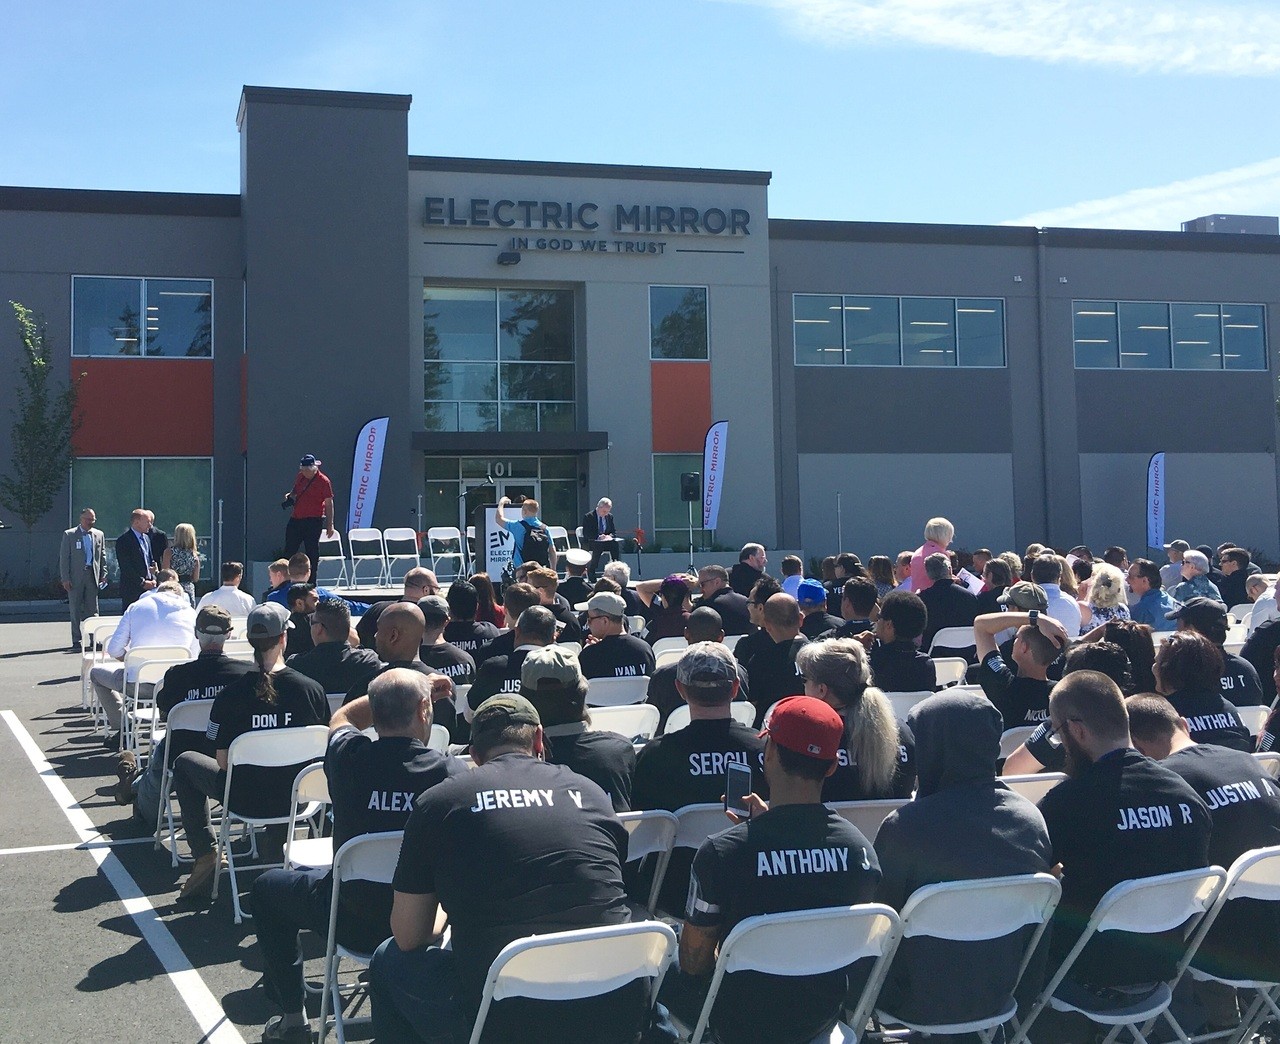 Dozens gathered to celebrate the opening of Electric Mirror’s headquarters and manufacturing plant on Friday.